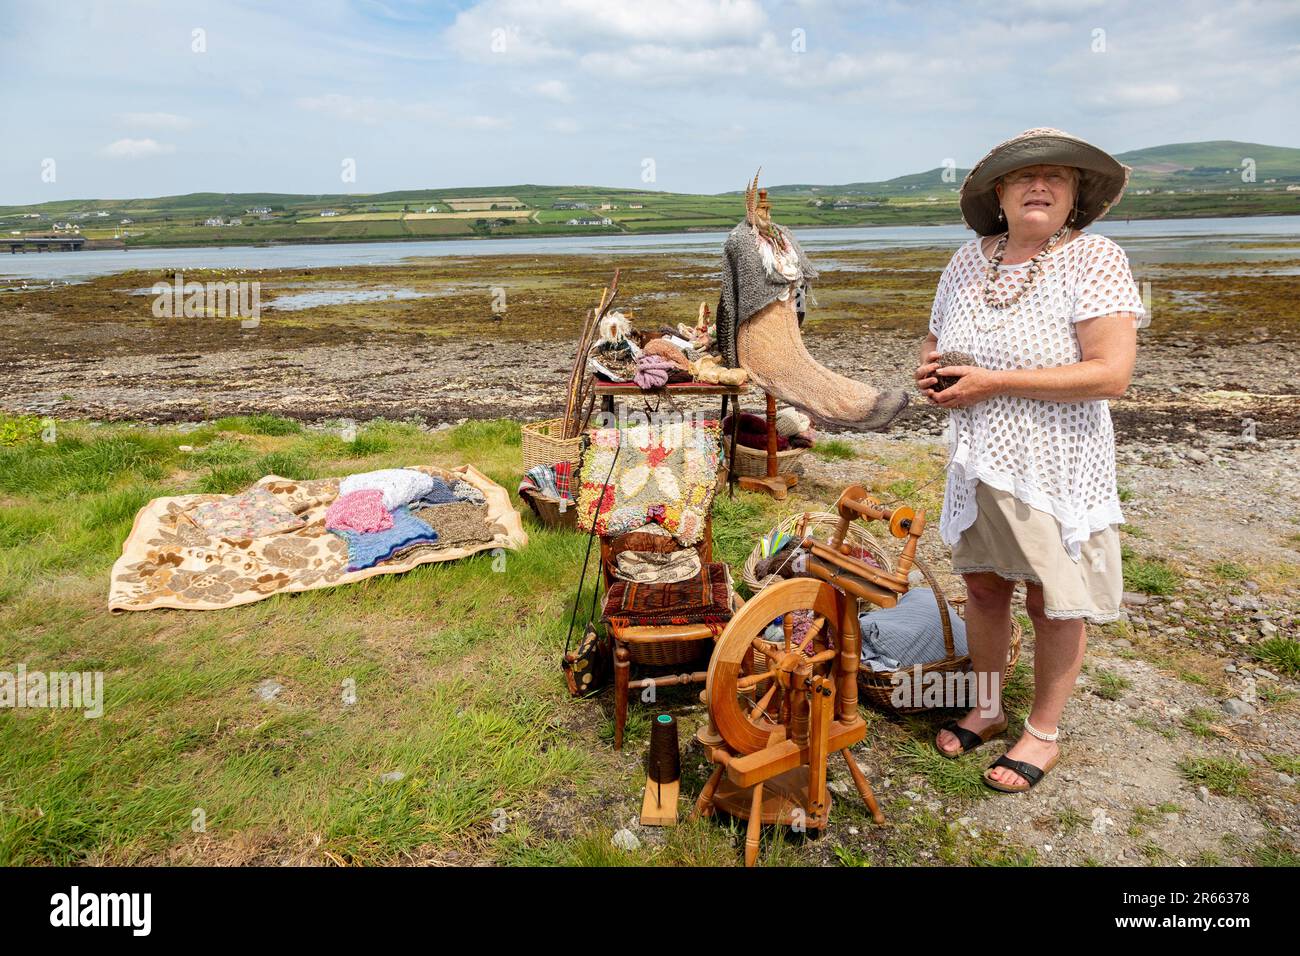 Senior Woman with spinning wheel, balls of wool and woven articles outdoors in Portmagee. Valentia Island in background. Stock Photo